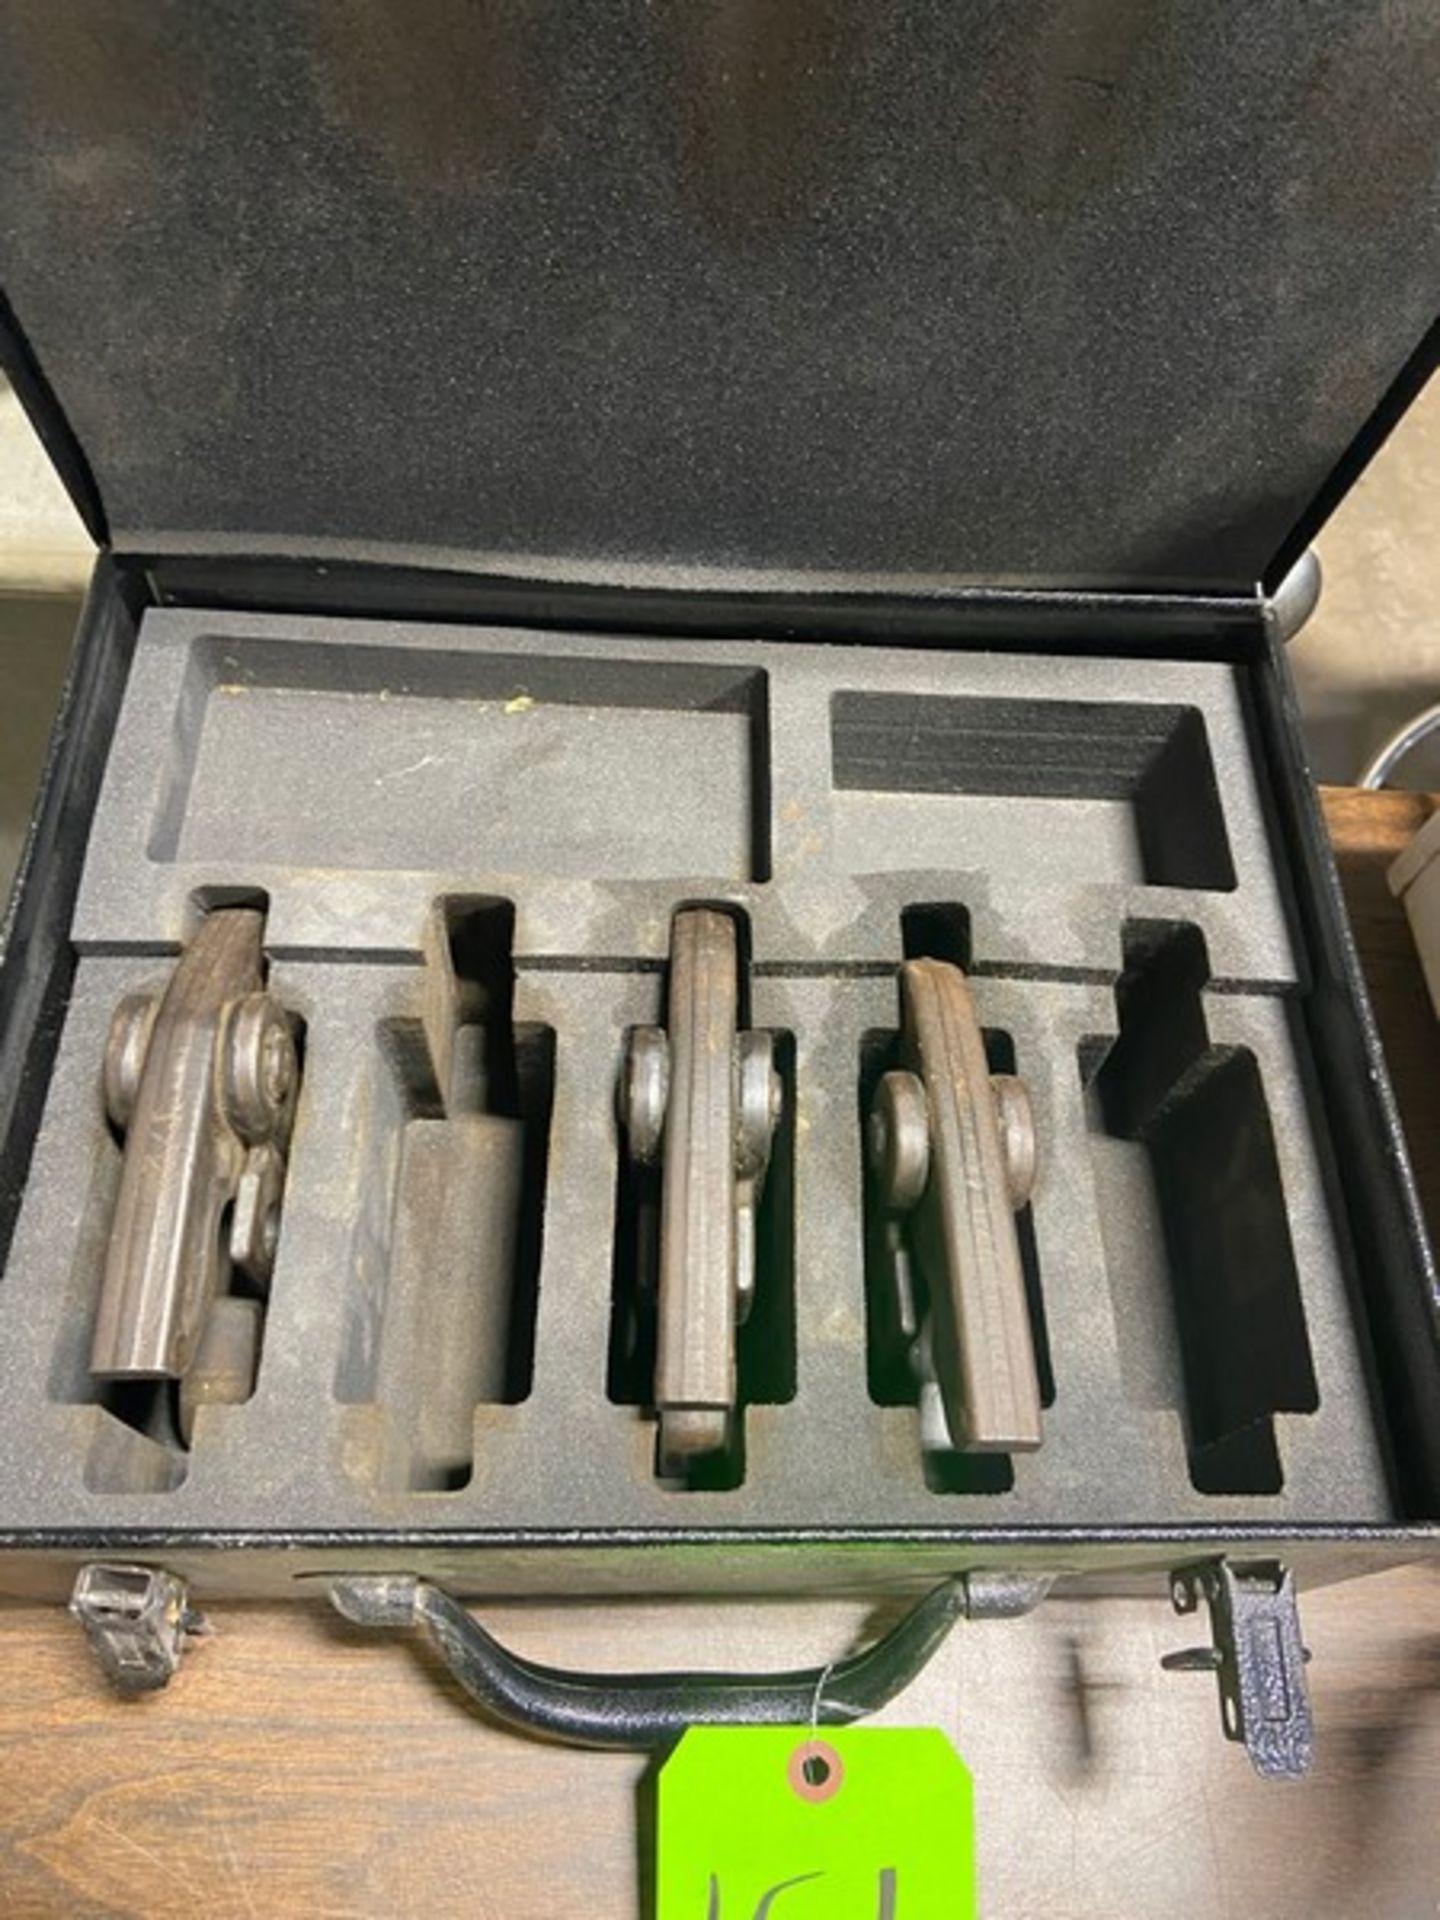 (3) NIBCO 1/2”- 1-1/4” Std. Press Jaw Kit, In Hard Case (NOTE: Includes 1", 1/2", 1-1/4" Jaws;